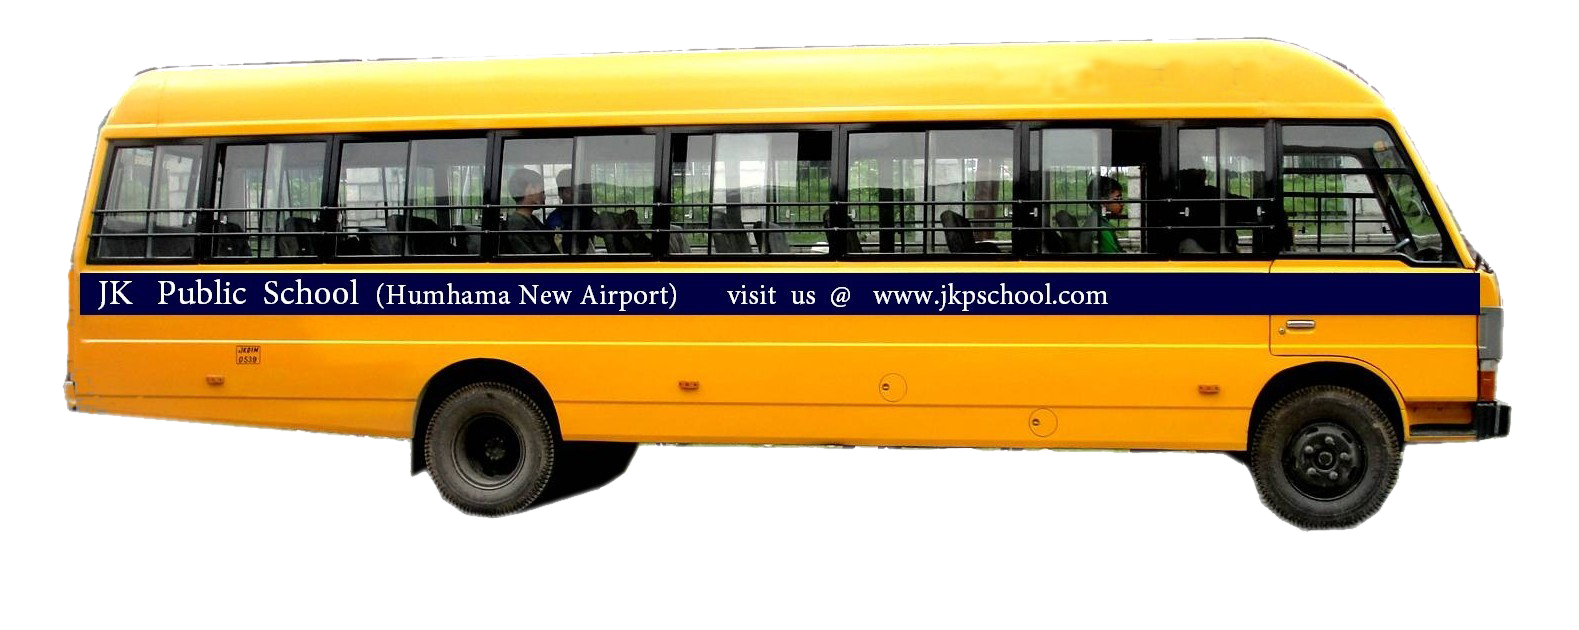 A Yellow School Bus With Blue And White Text